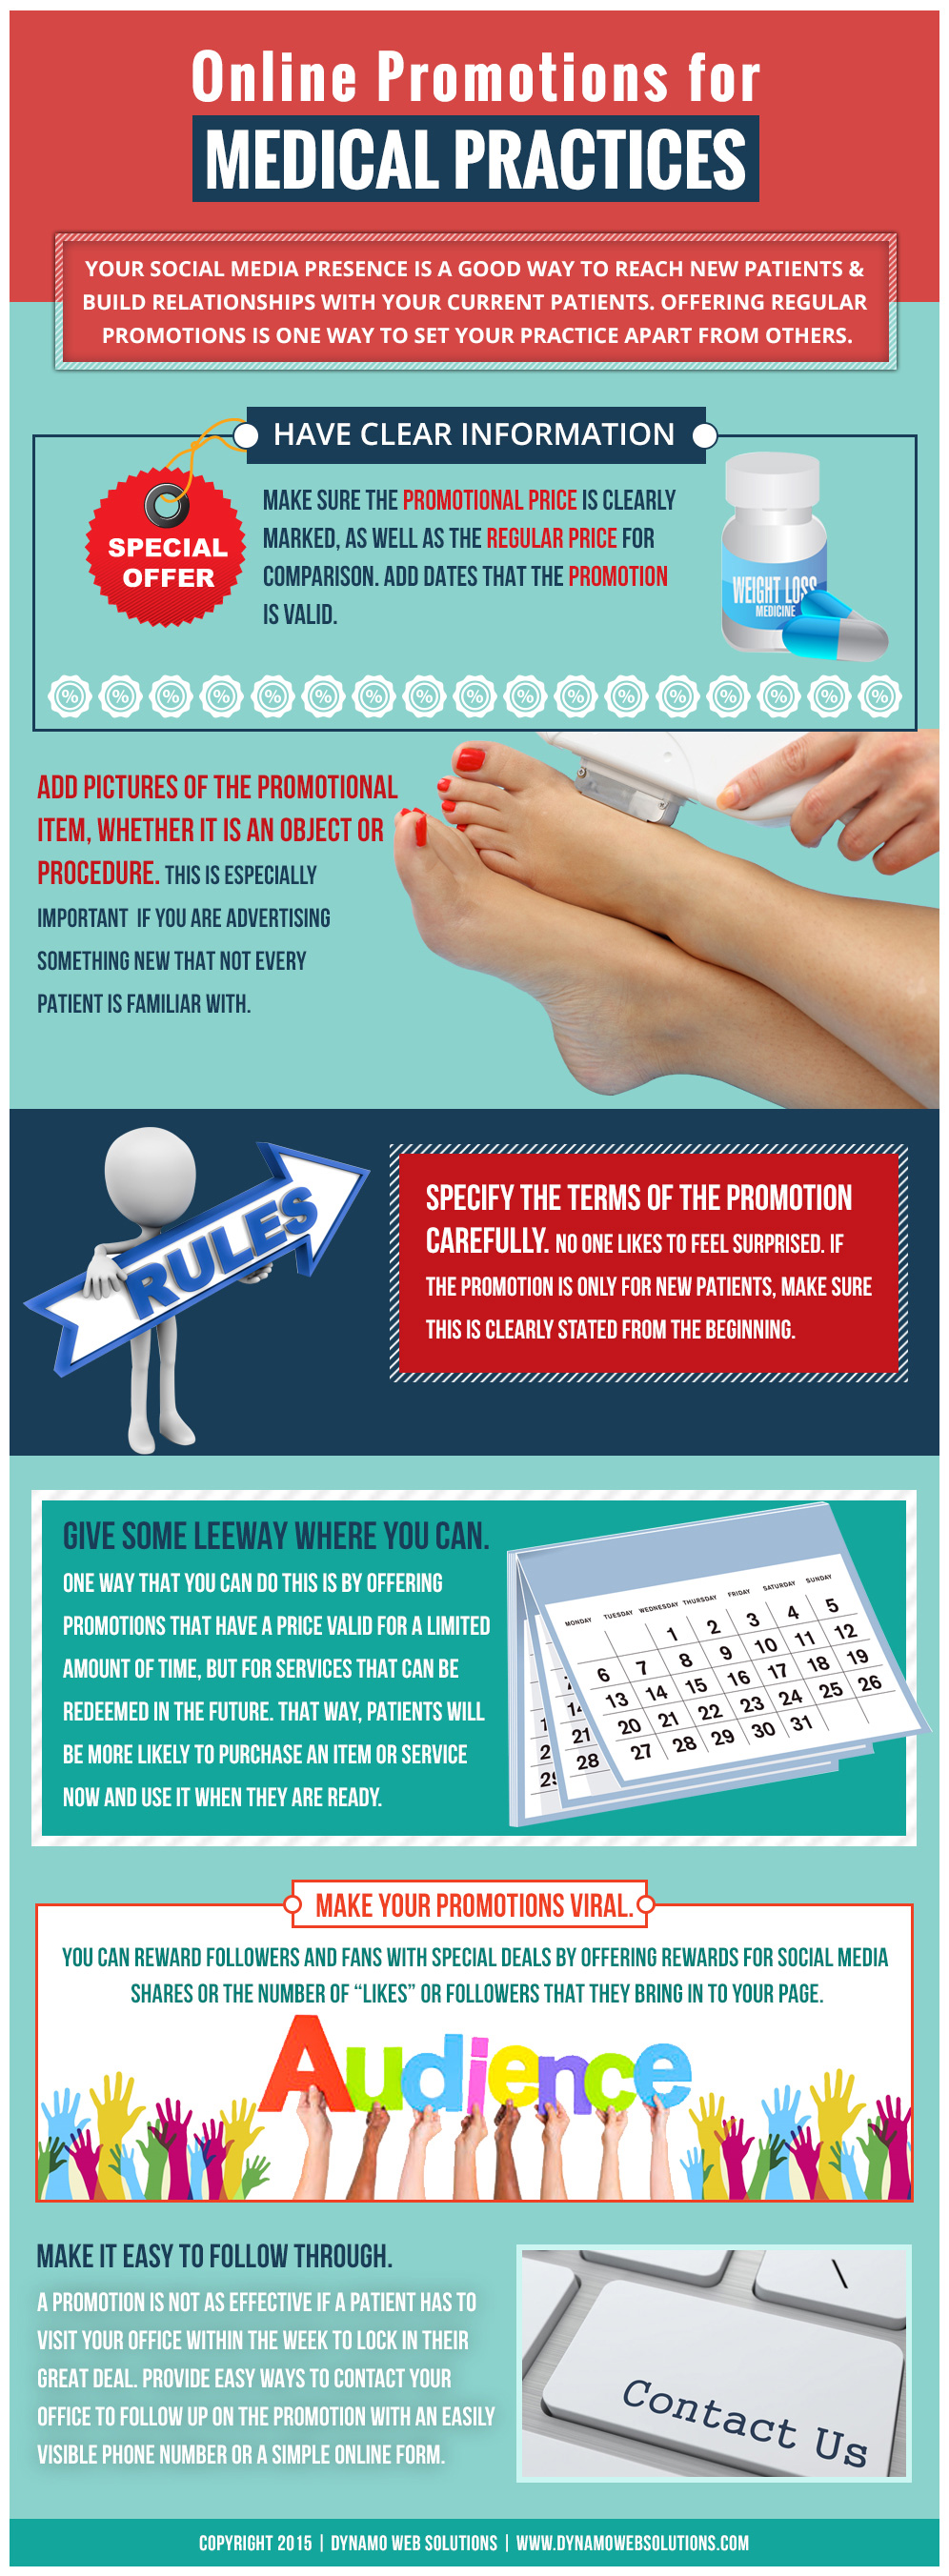 Online Promotions for Medical Practices by Dynamo Web Solutions 1 - Infographics